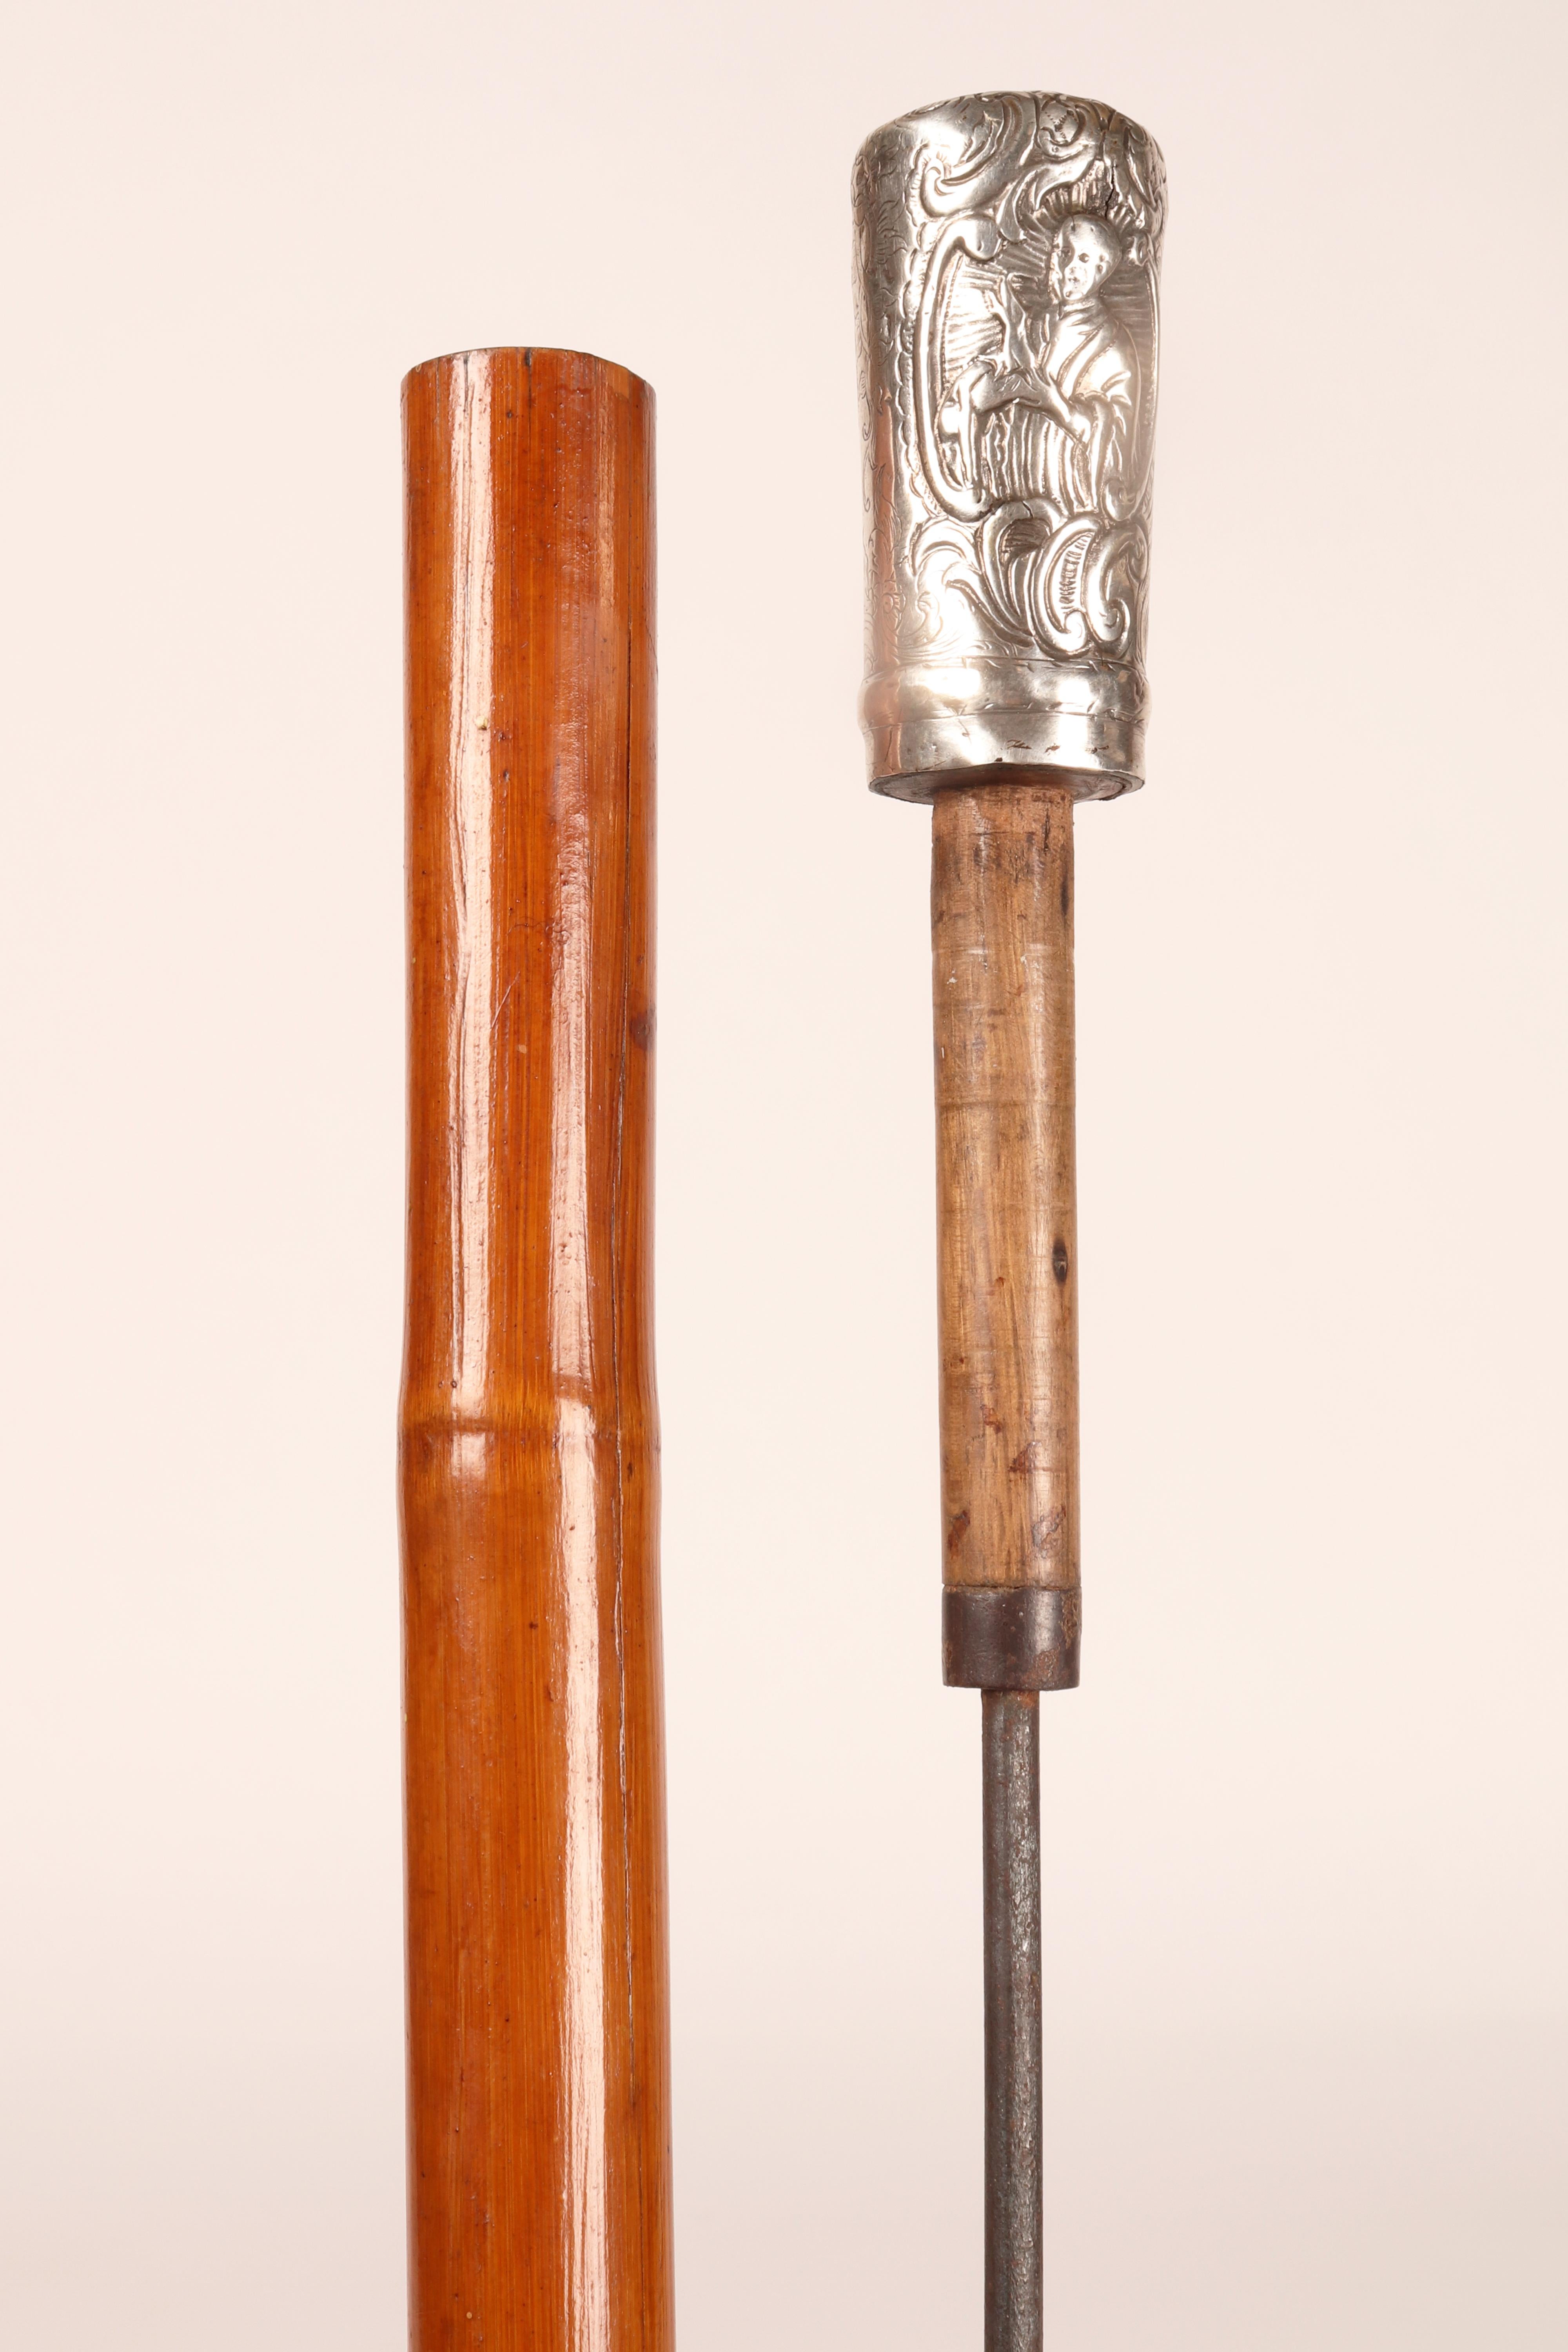 Customs officer's walking stick for goods inspection, Germany, 1870. For Sale 7